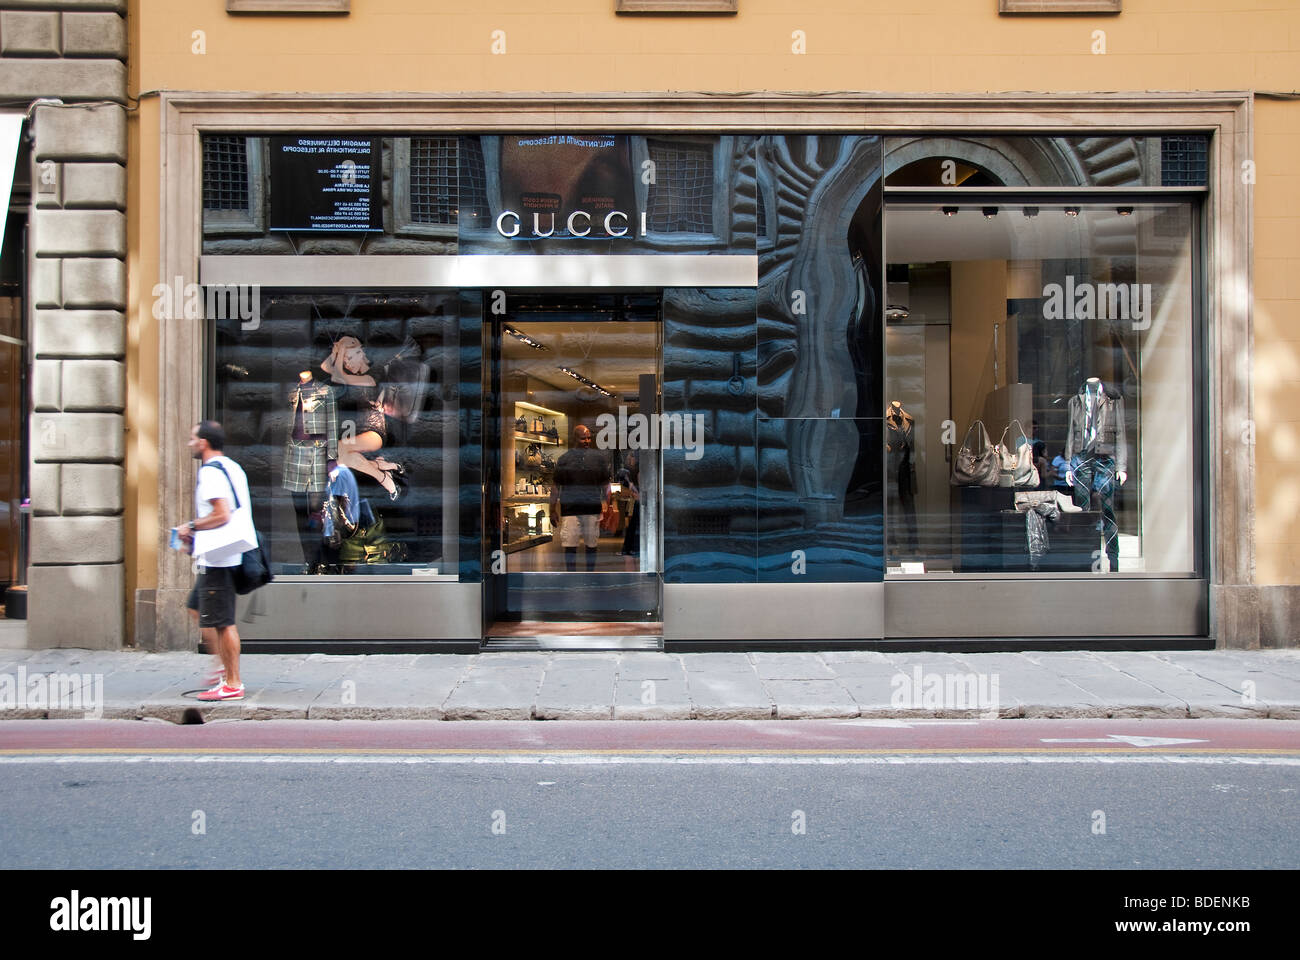 Gucci shop front in Via Tornabuoni, Florence Stock Photo - Alamy